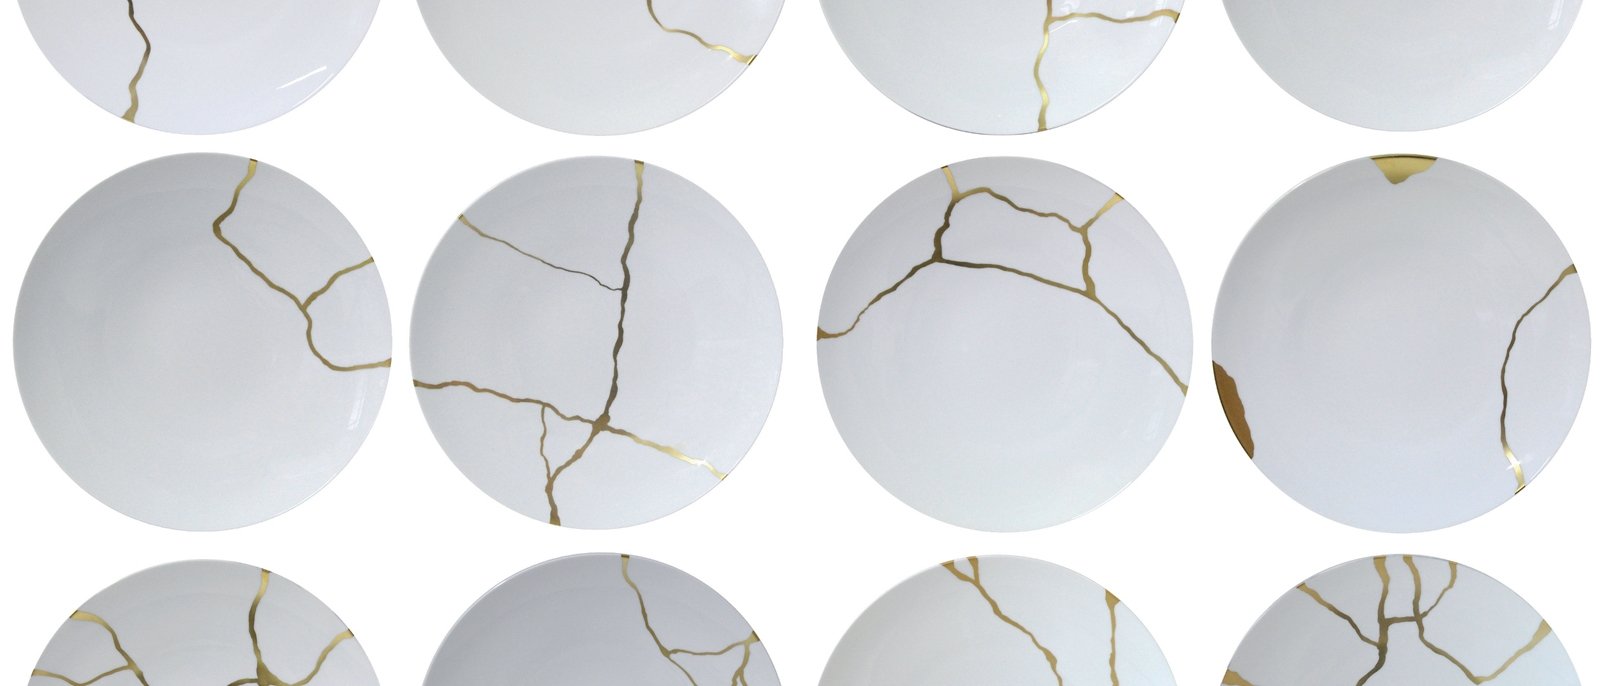 White bowls with the cracks mended with gold to allow the cracks to be shown, rather than hidden.